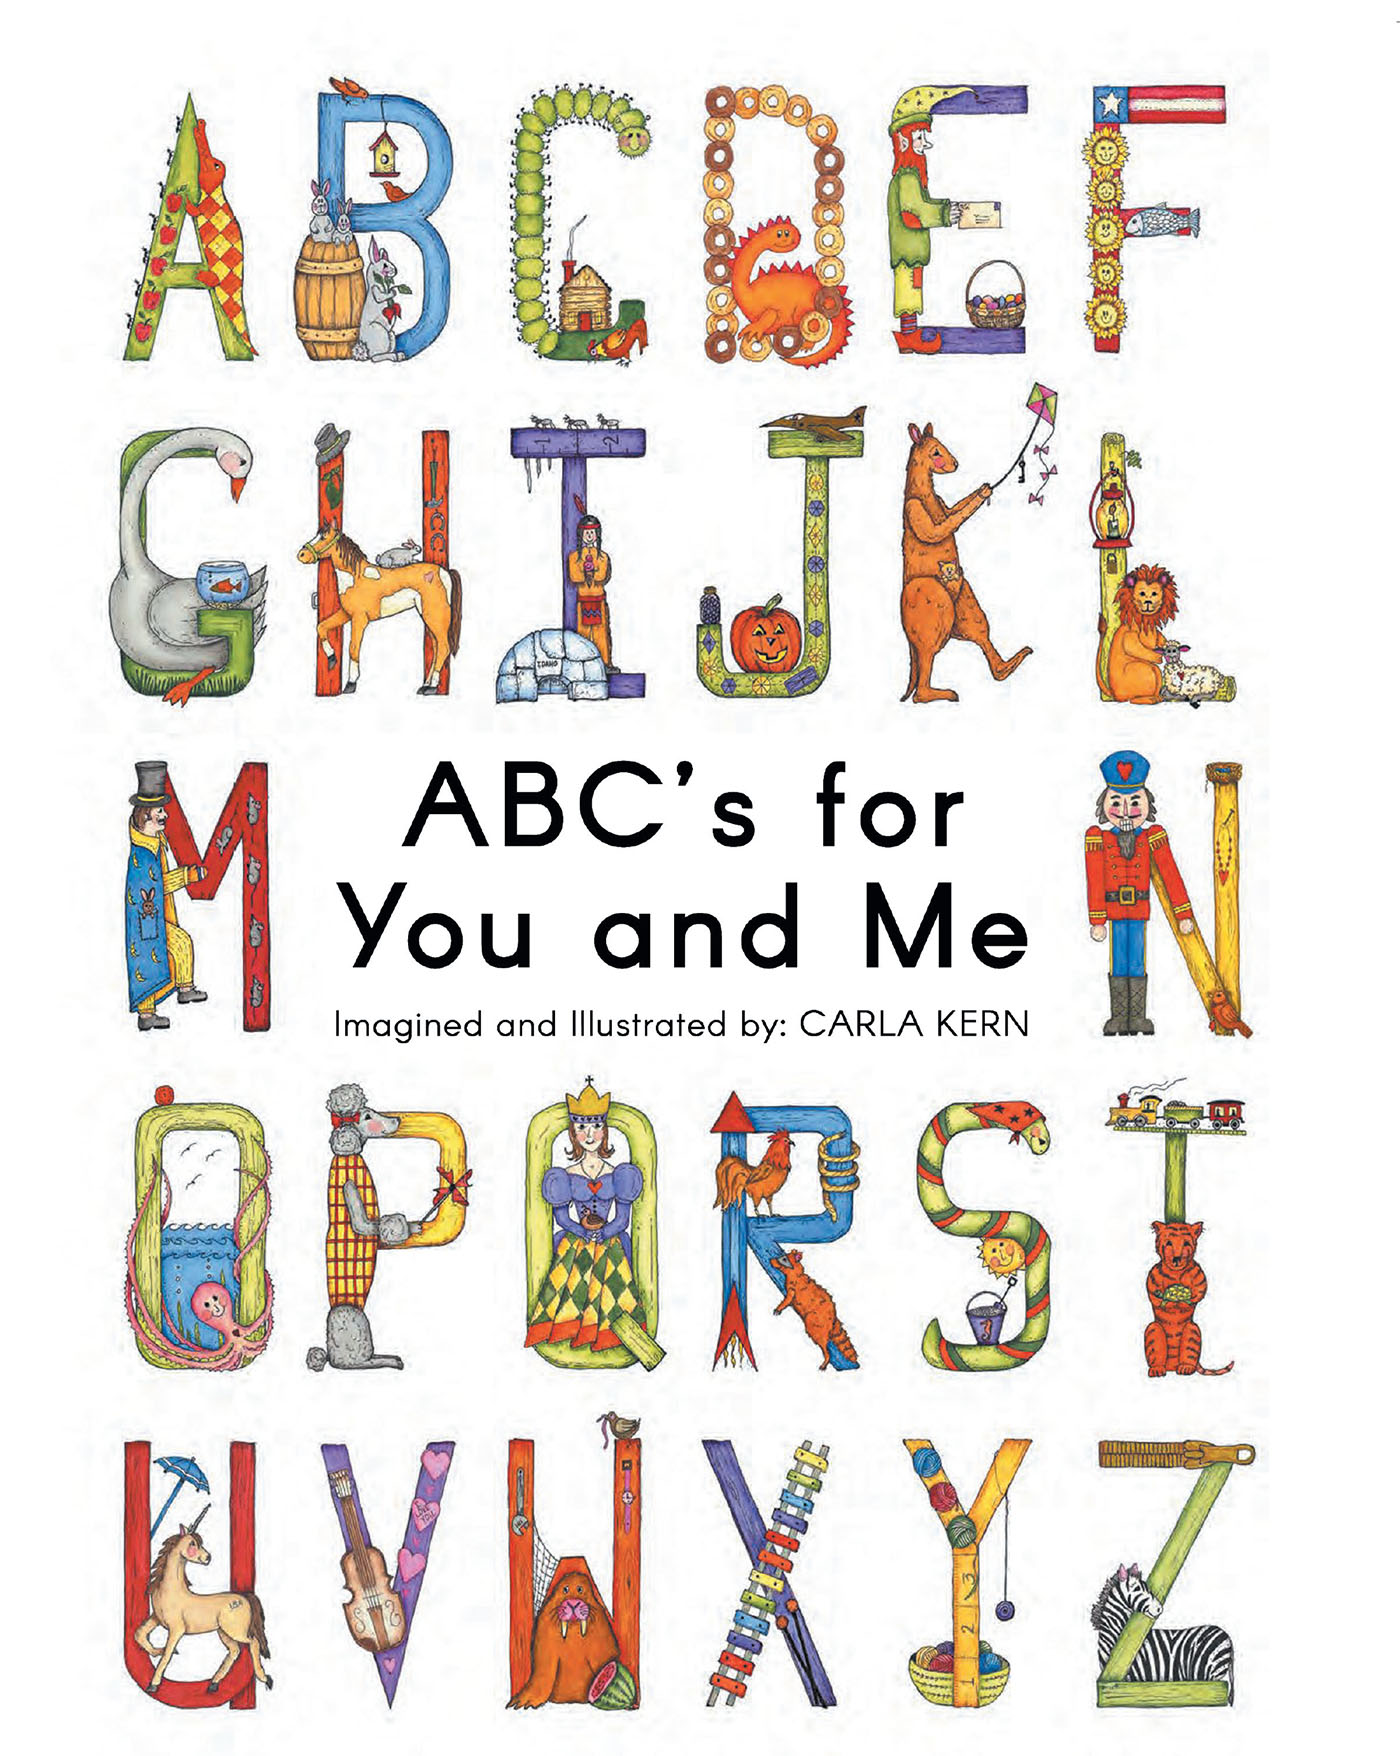 Carla Kern’s Newly Released "ABC’s for You and Me" is a Fun Resource for Helping Young Readers Learn Reading Essentials